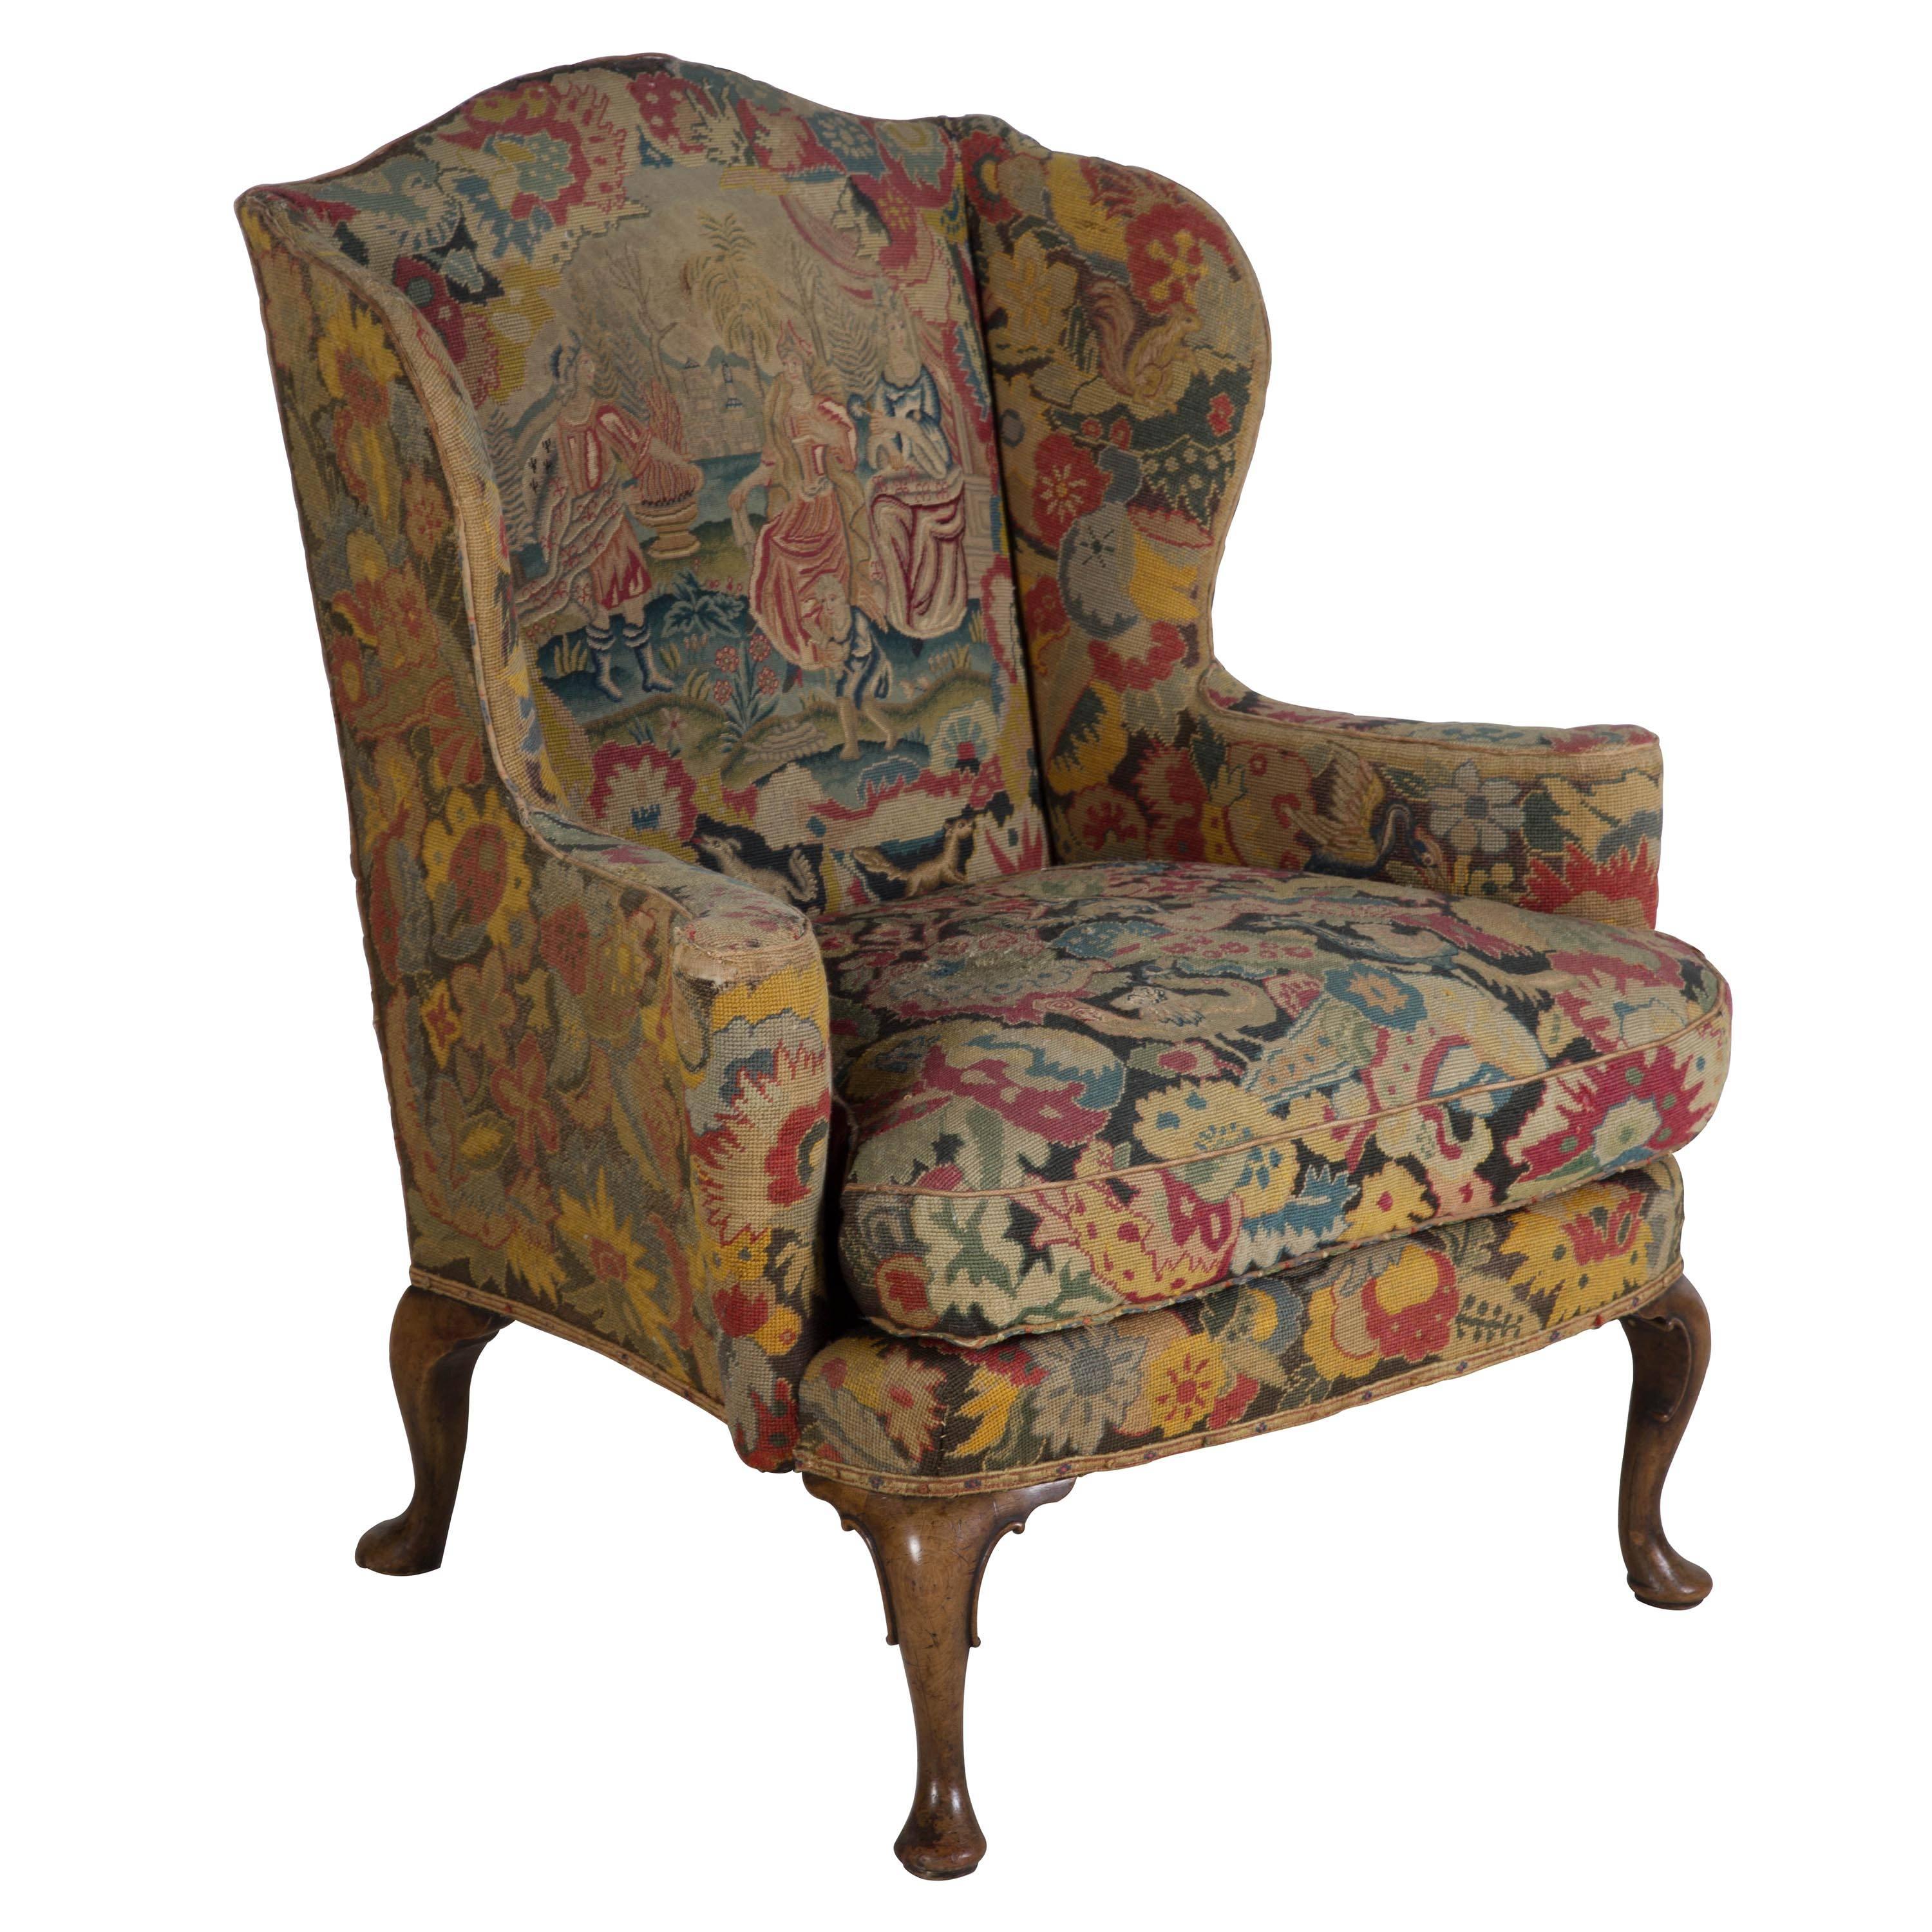 A stunning and wonderful scale George II period wing armchair on walnut cabriole legs, in charming, but worn, original needlepoint, circa 1740. Seat depth 40cm.